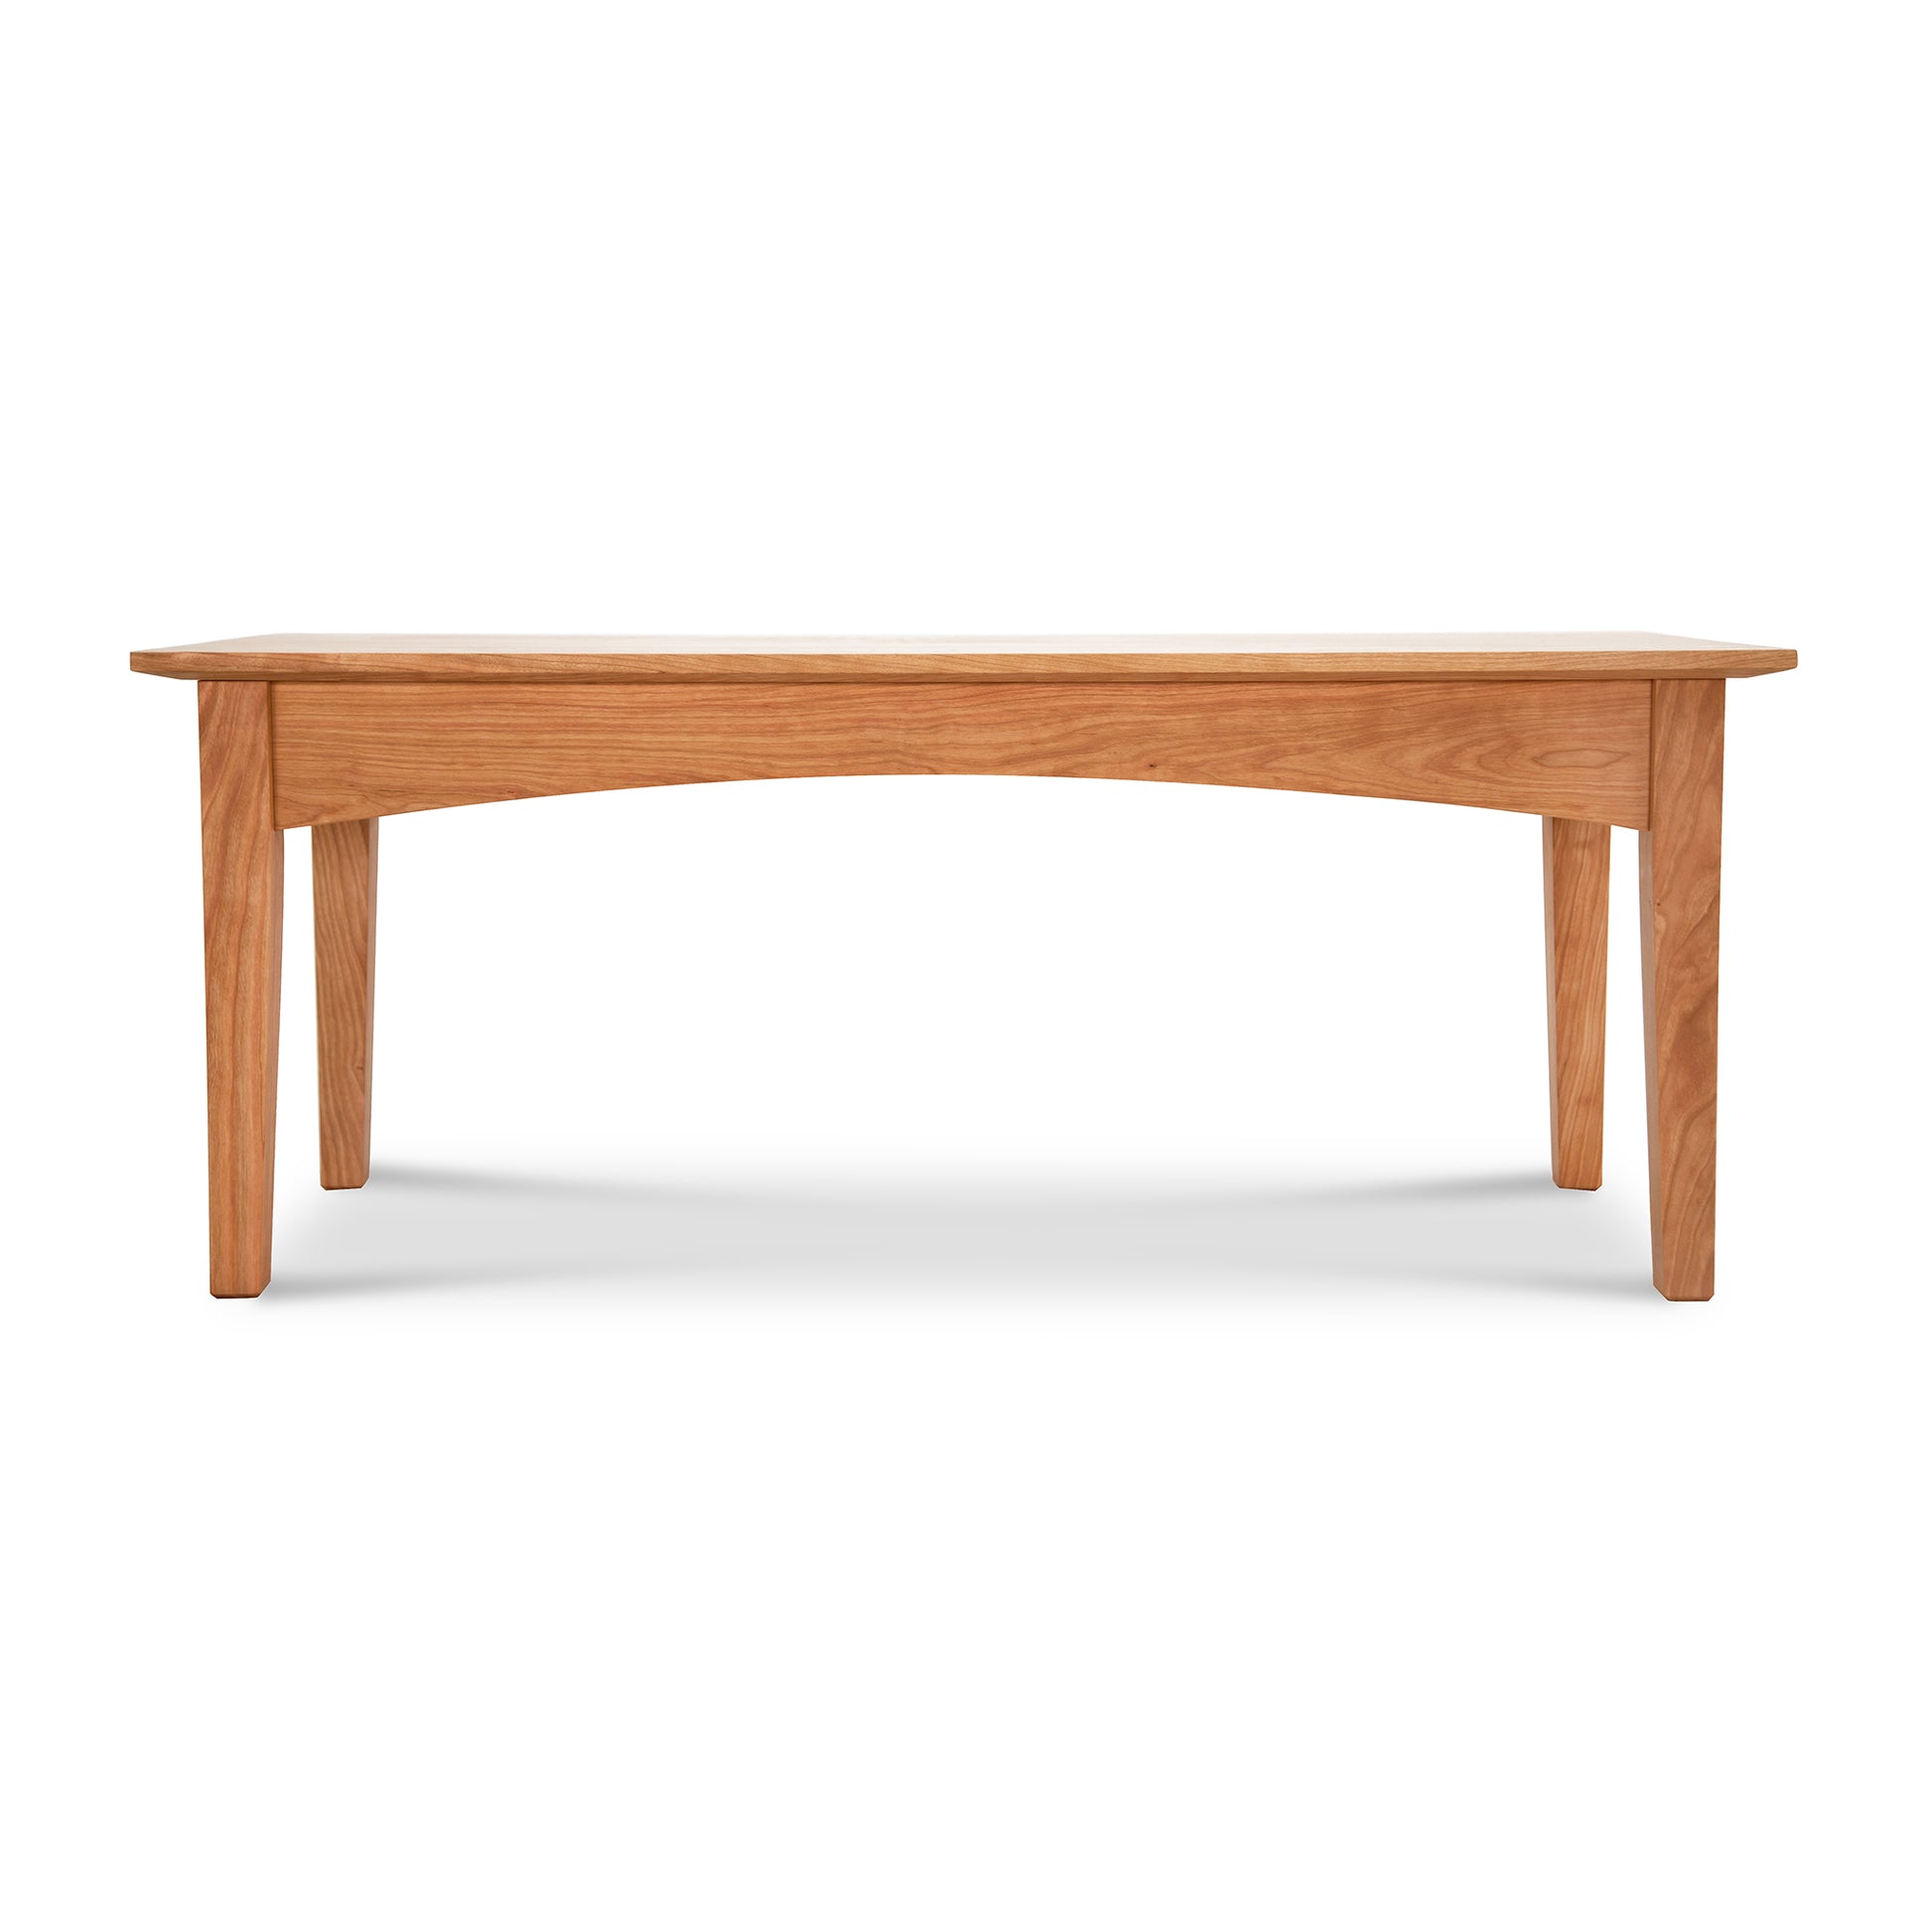 A handcrafted Maple Corner Woodworks American Shaker Coffee Table, made in American Shaker style, on a white background.